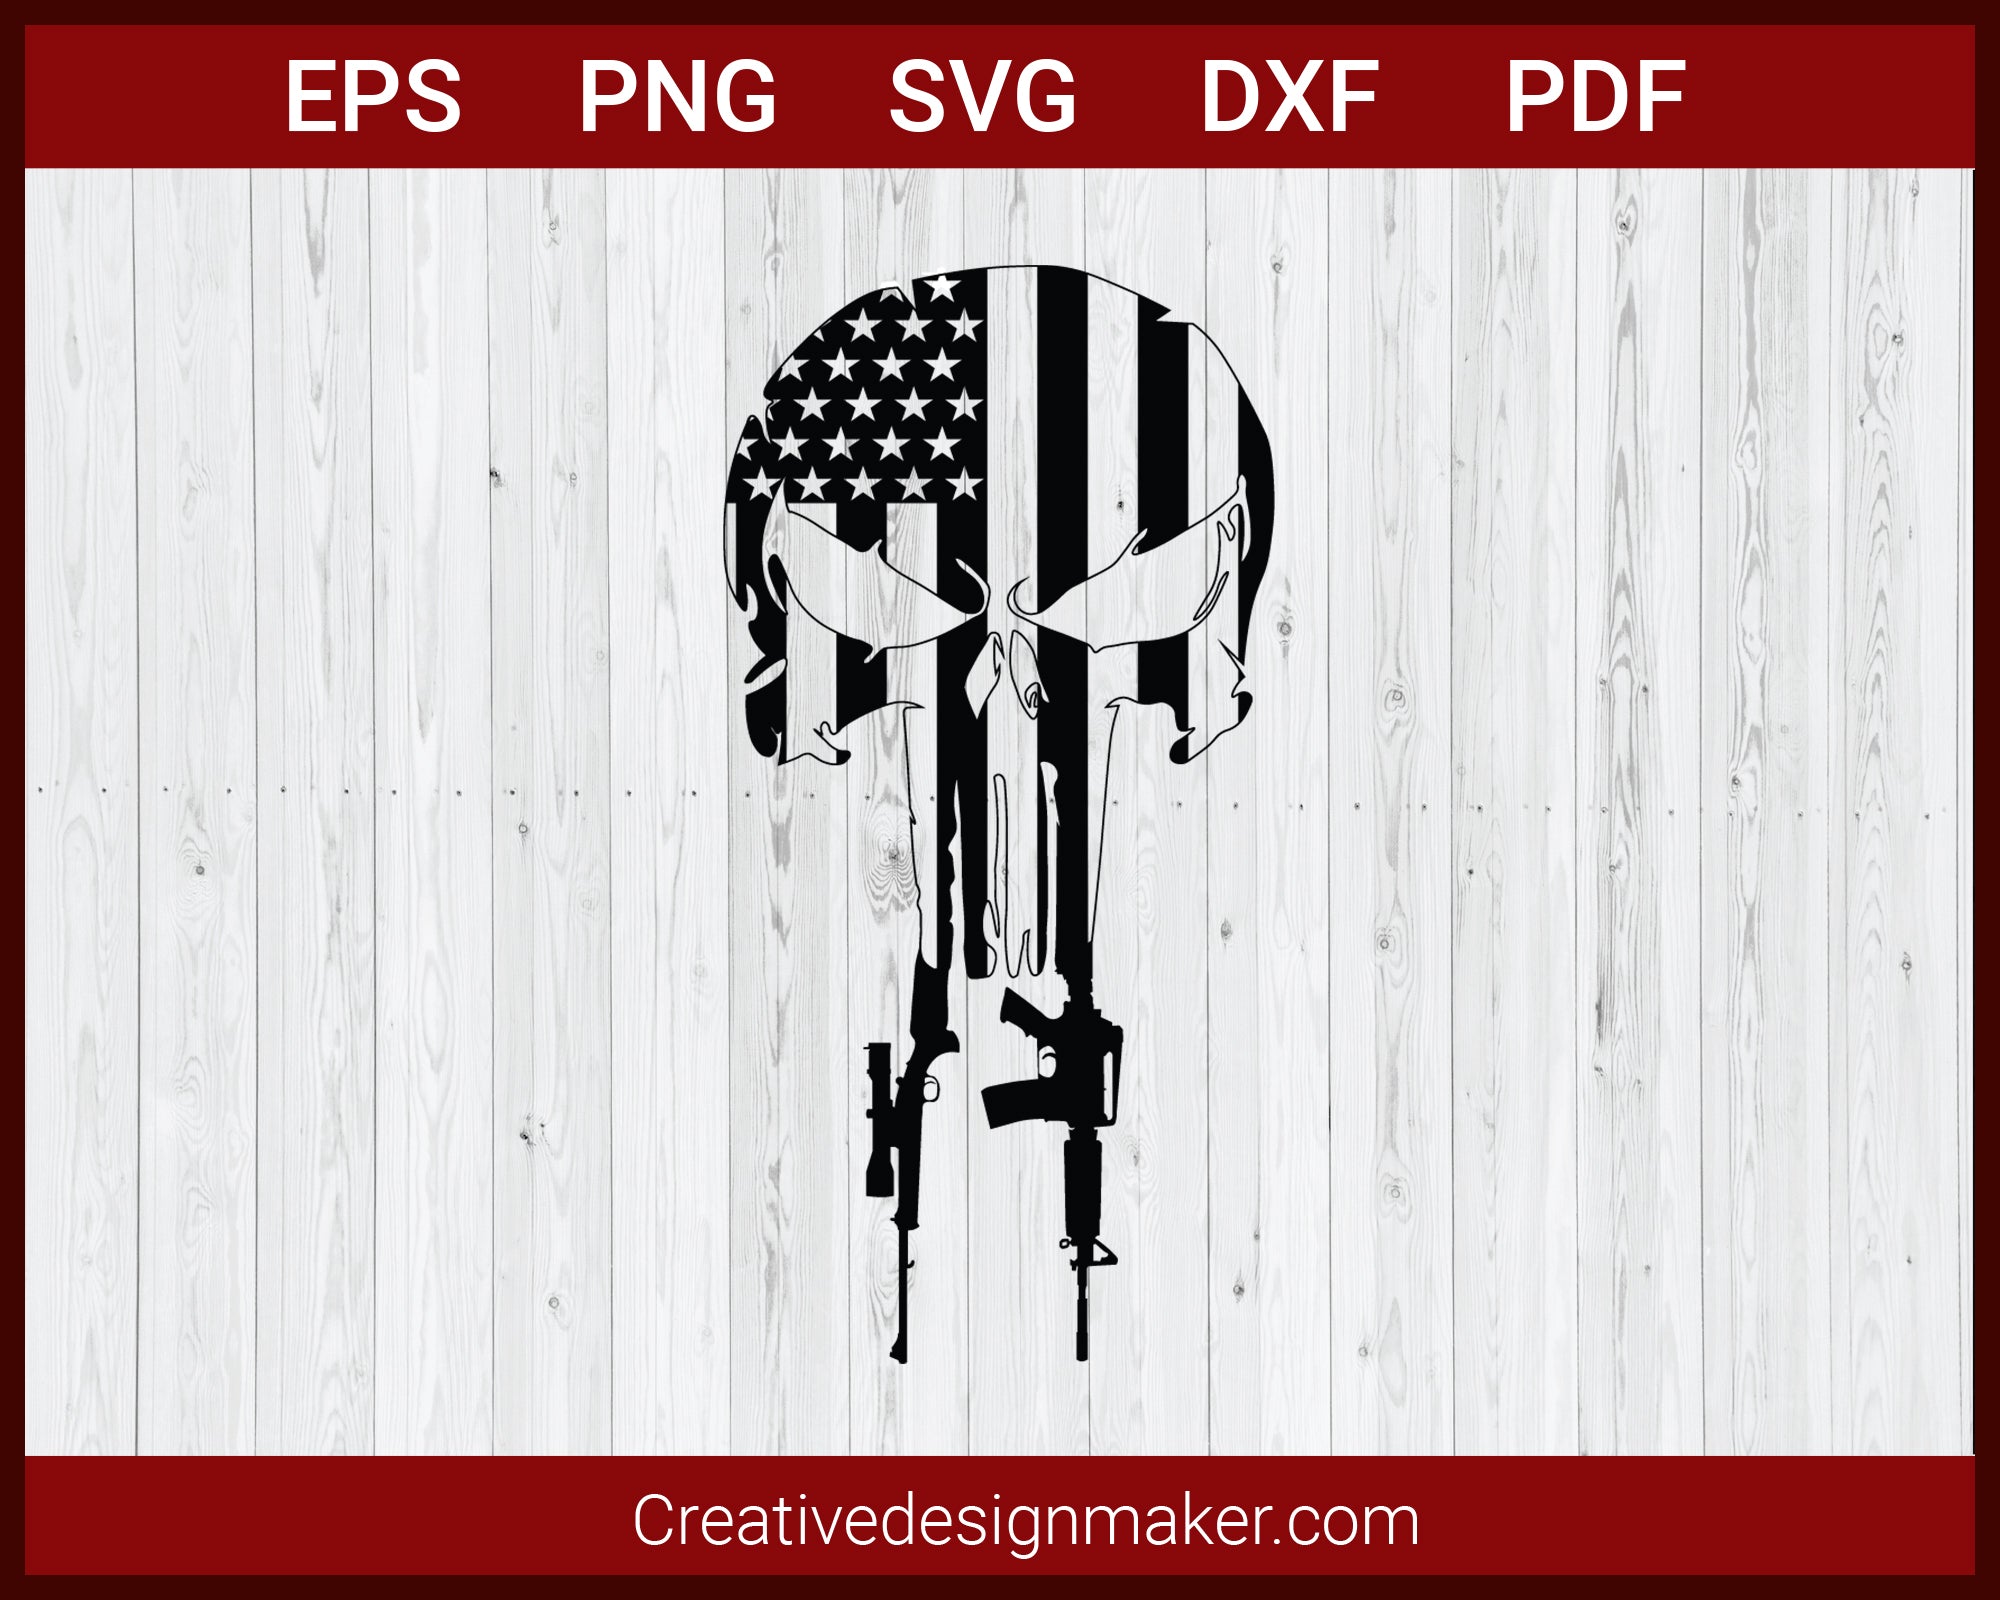 Distressed USA Flag Punisher Skull With Guns SVG Cricut Silhouette DXF PNG EPS Cut File